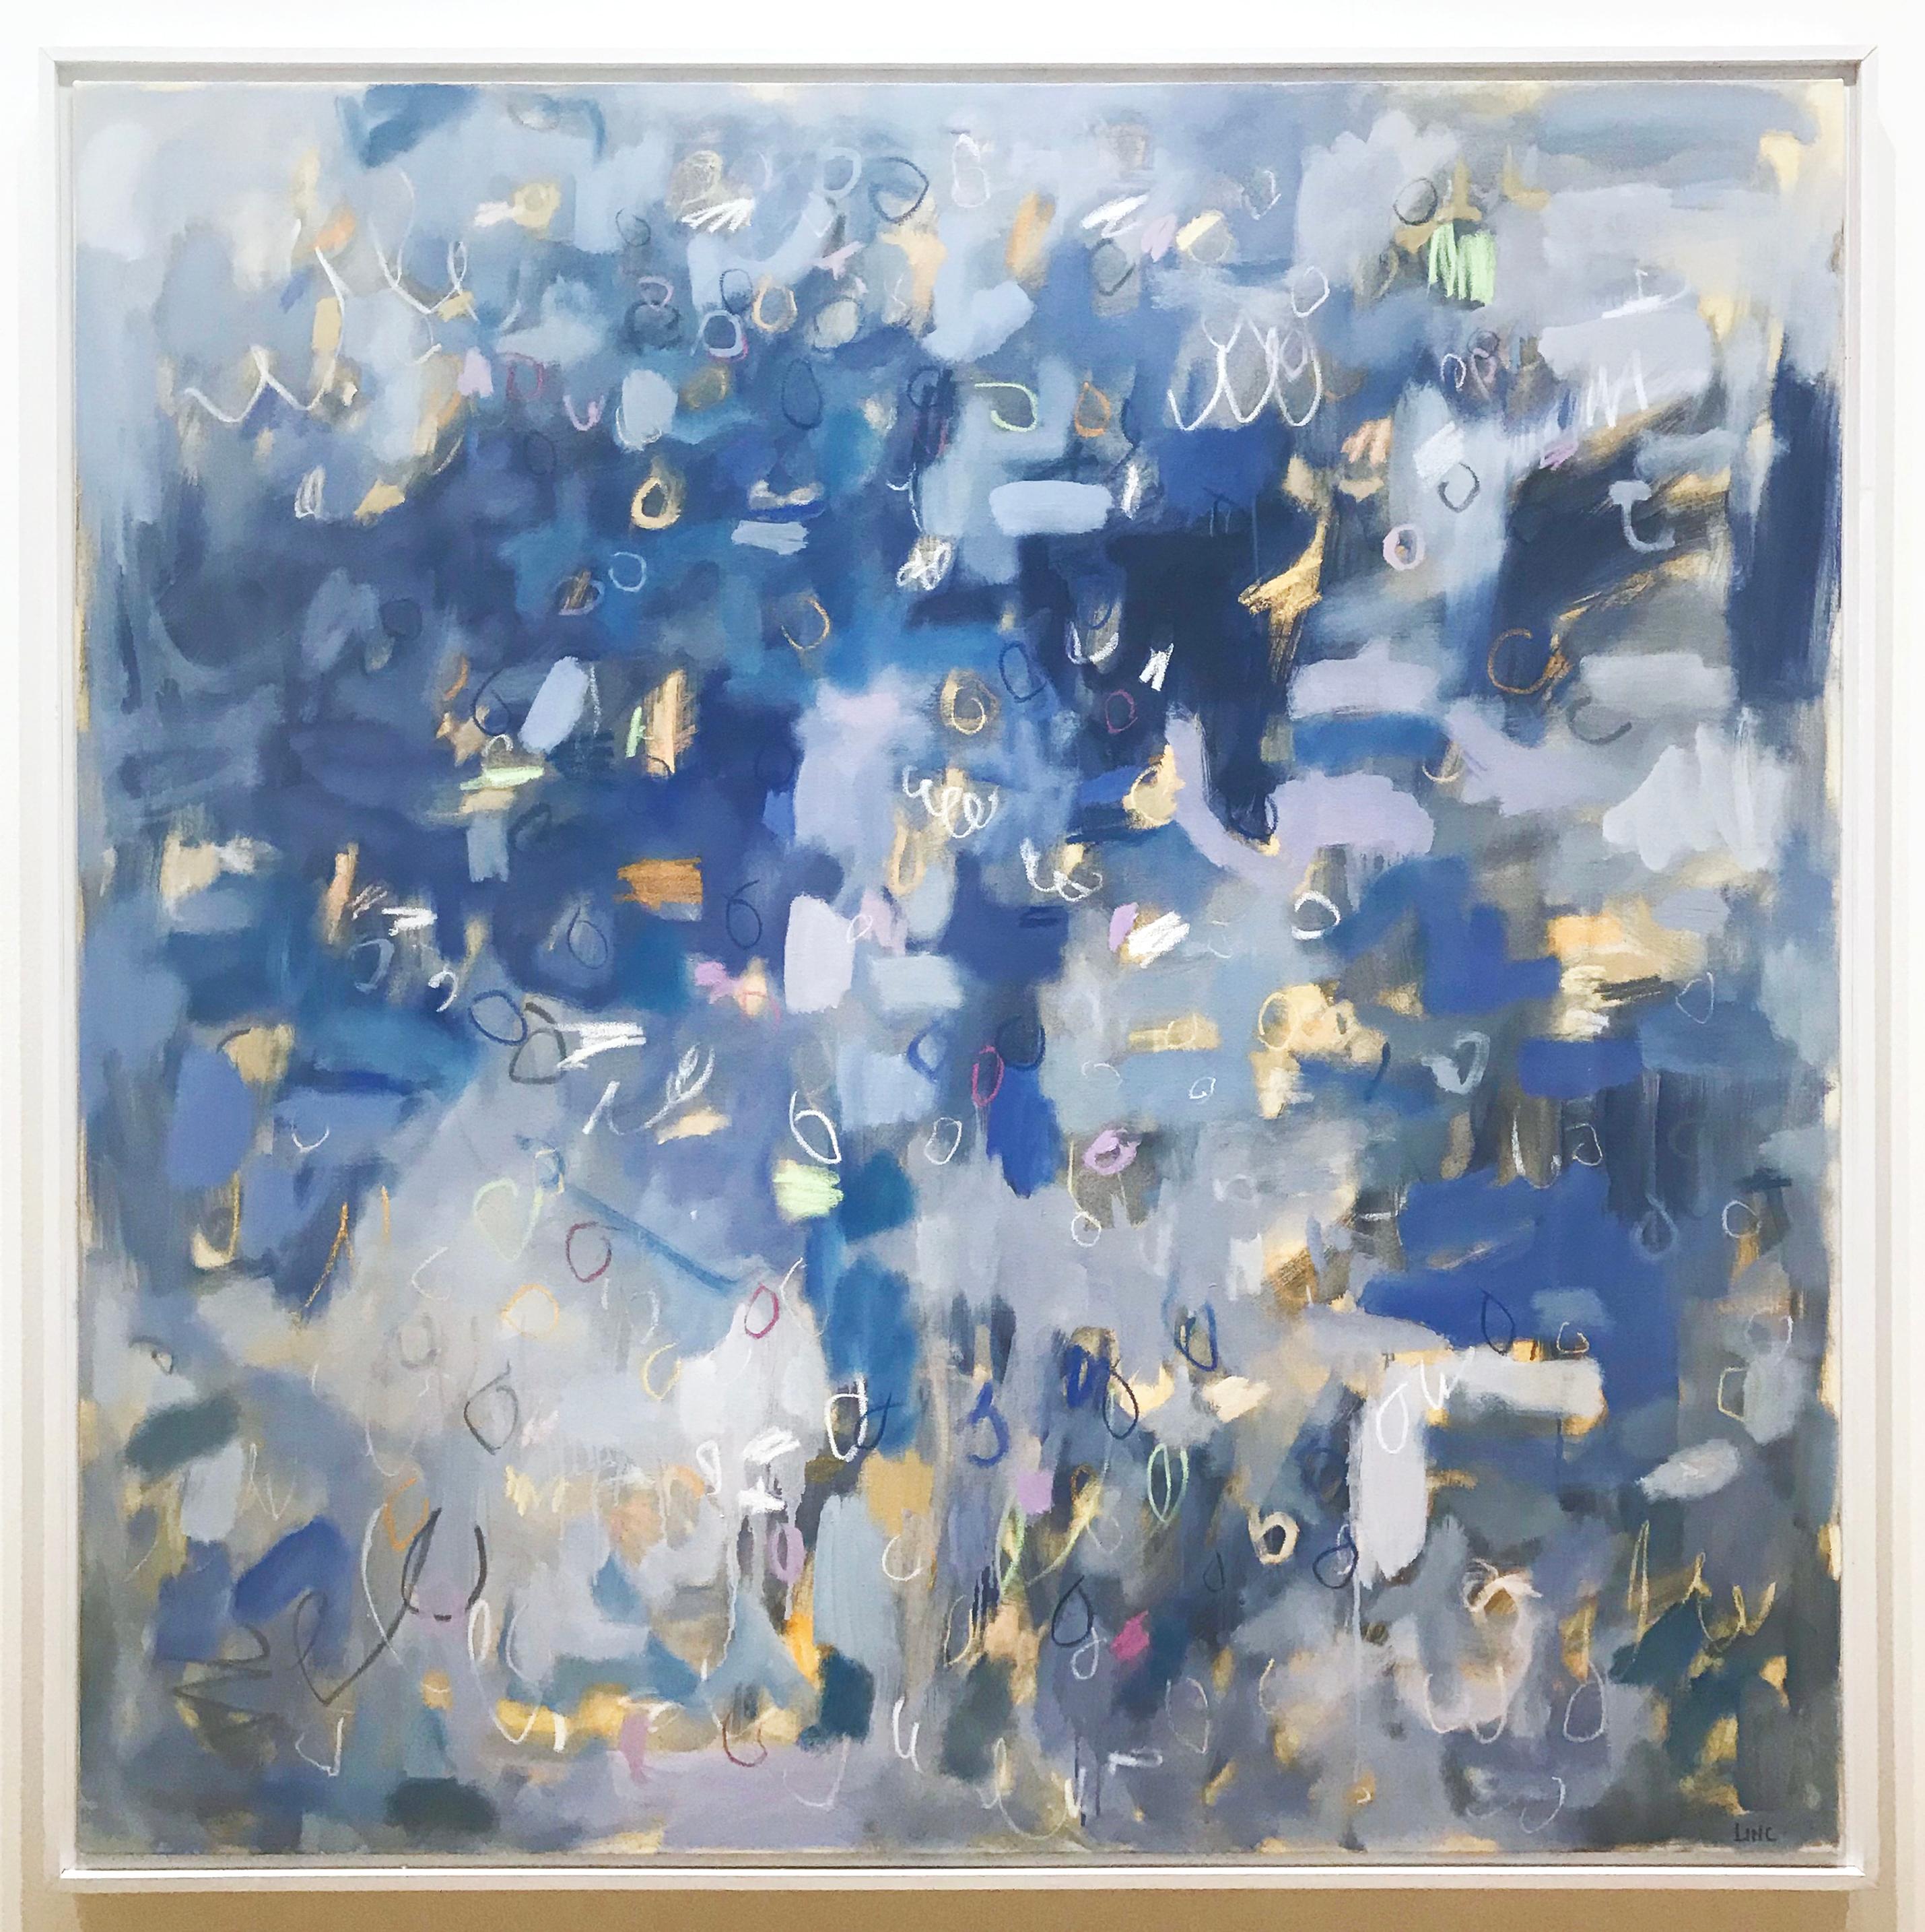 Oil paint, oil pastel and pencil on canvas.

Linc Thelen’s abstractions are pleasant investigations into the formal issues of abstraction. His common forms are the circle, the line, the scallop, and the scribble. These forms construct Thelen’s